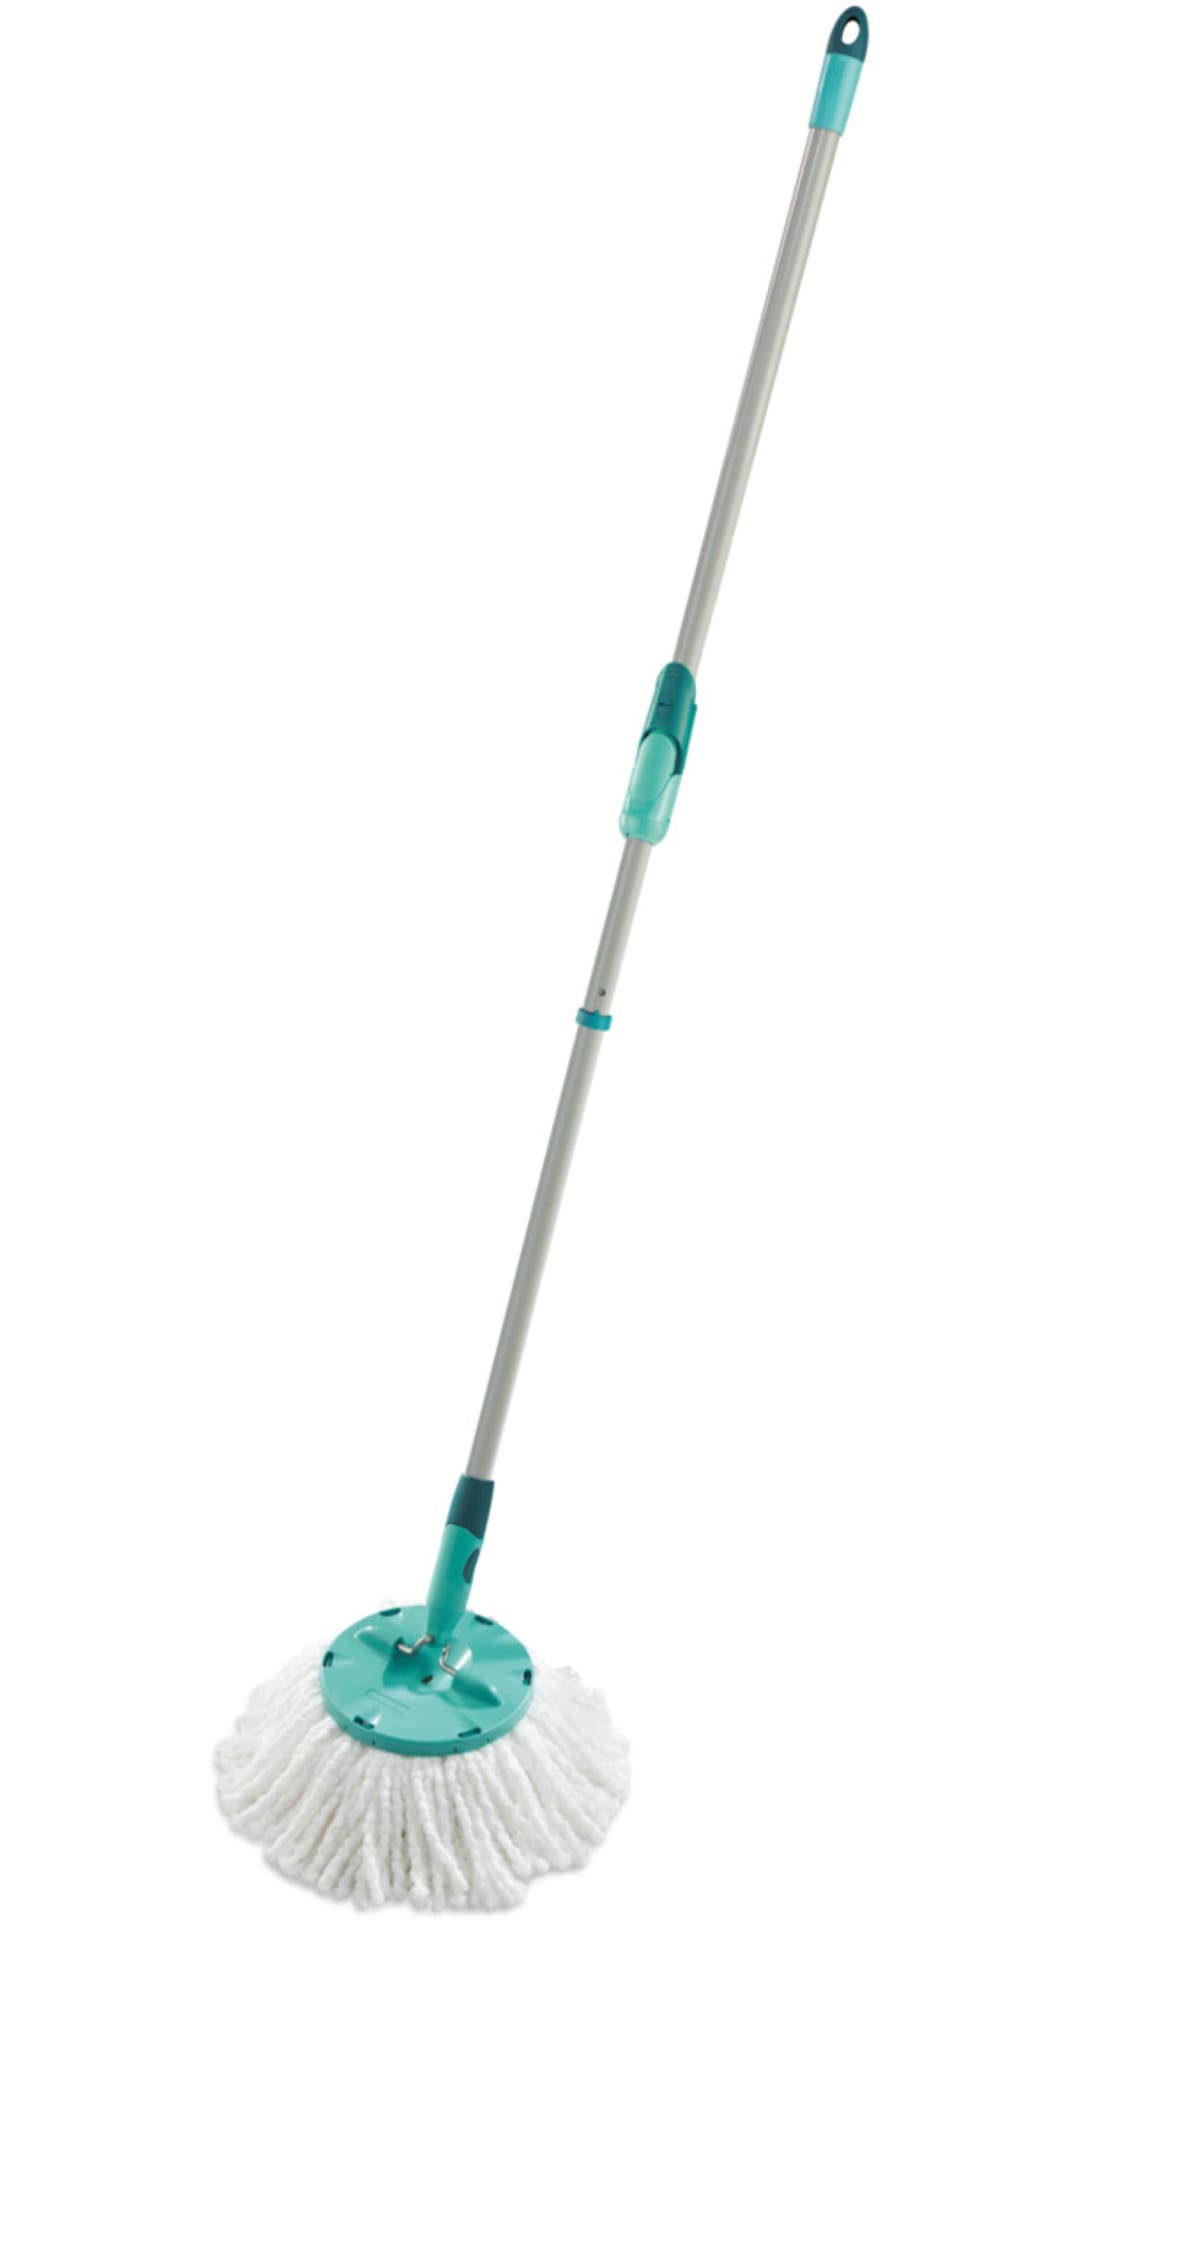 REPLACEMENT CLEAN TWIST DISC MOP